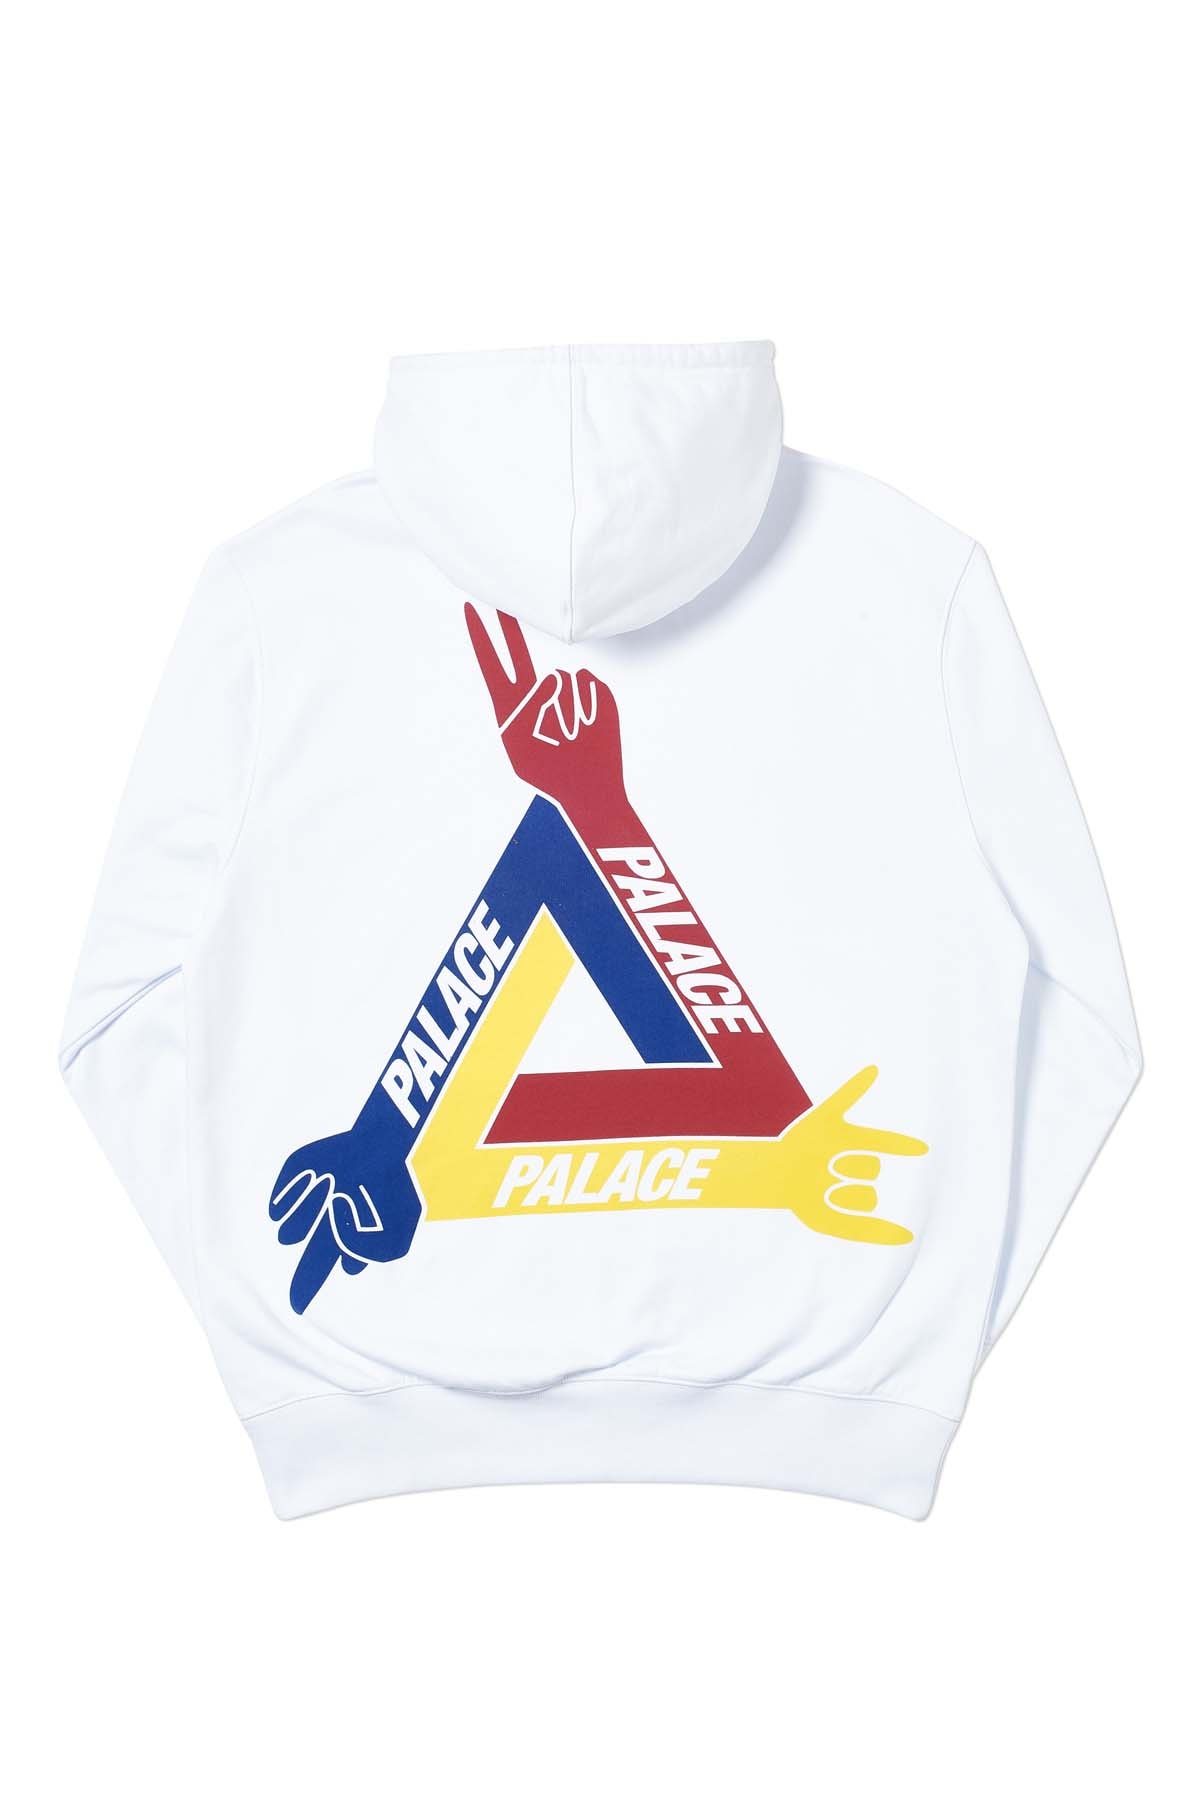 Palace Jean-Charles Castelbajc collection collaboration teaser video